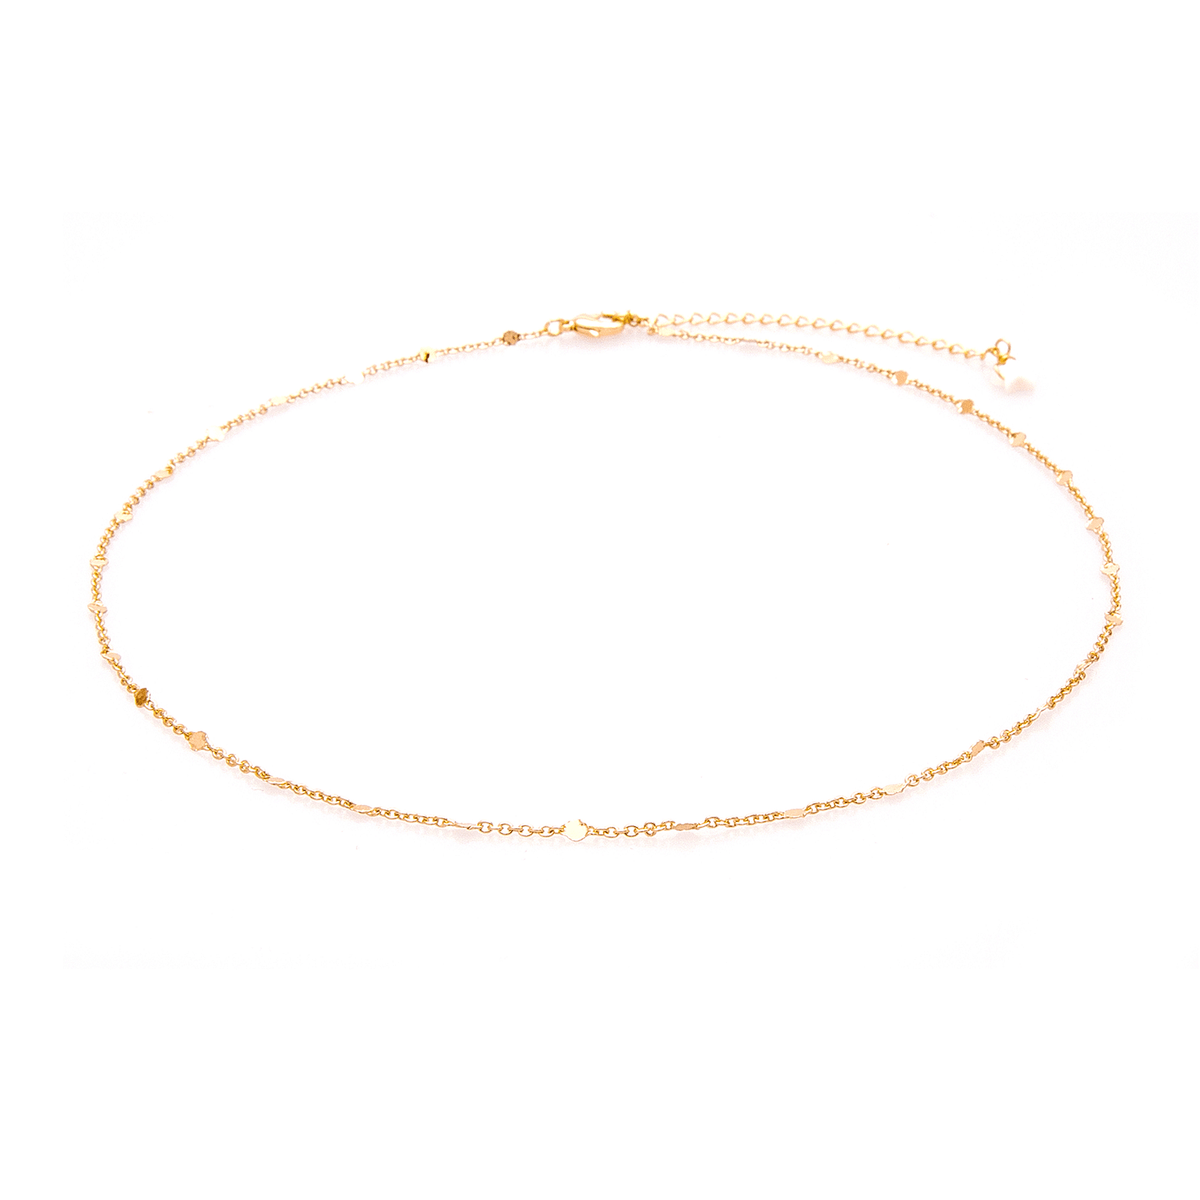 A dainty gold chain necklace